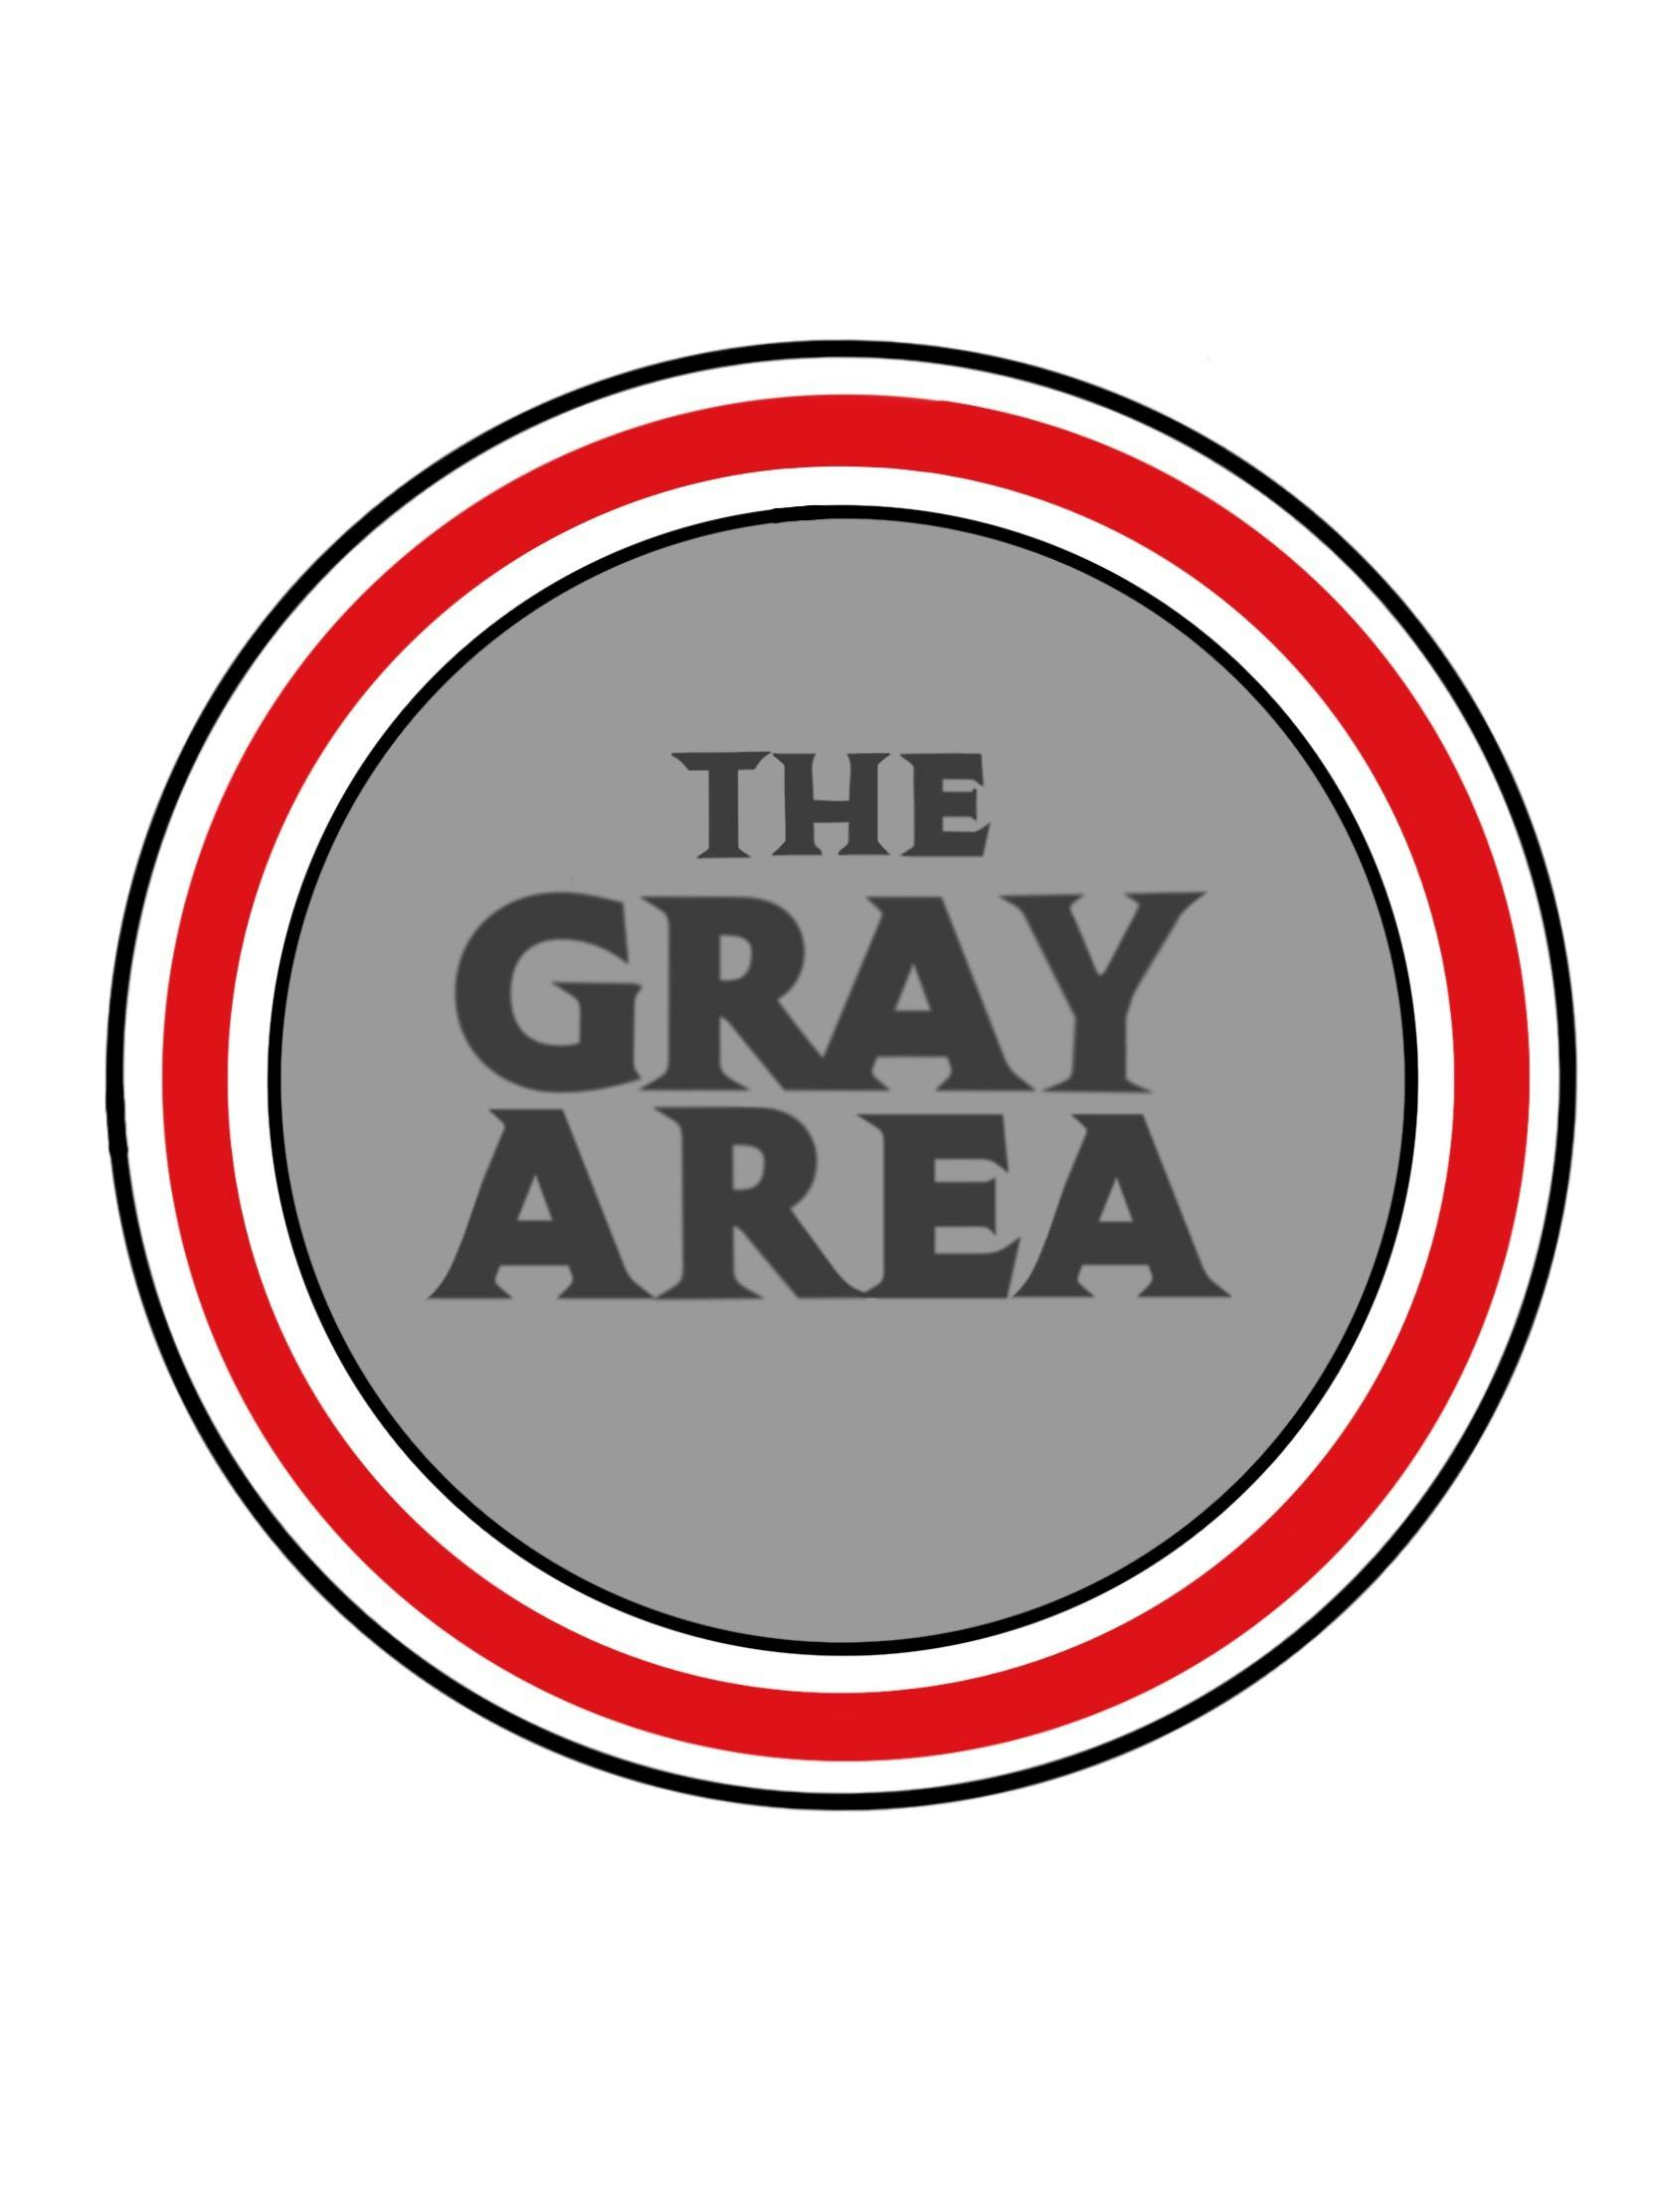 DM Gray of "The Gray Area"